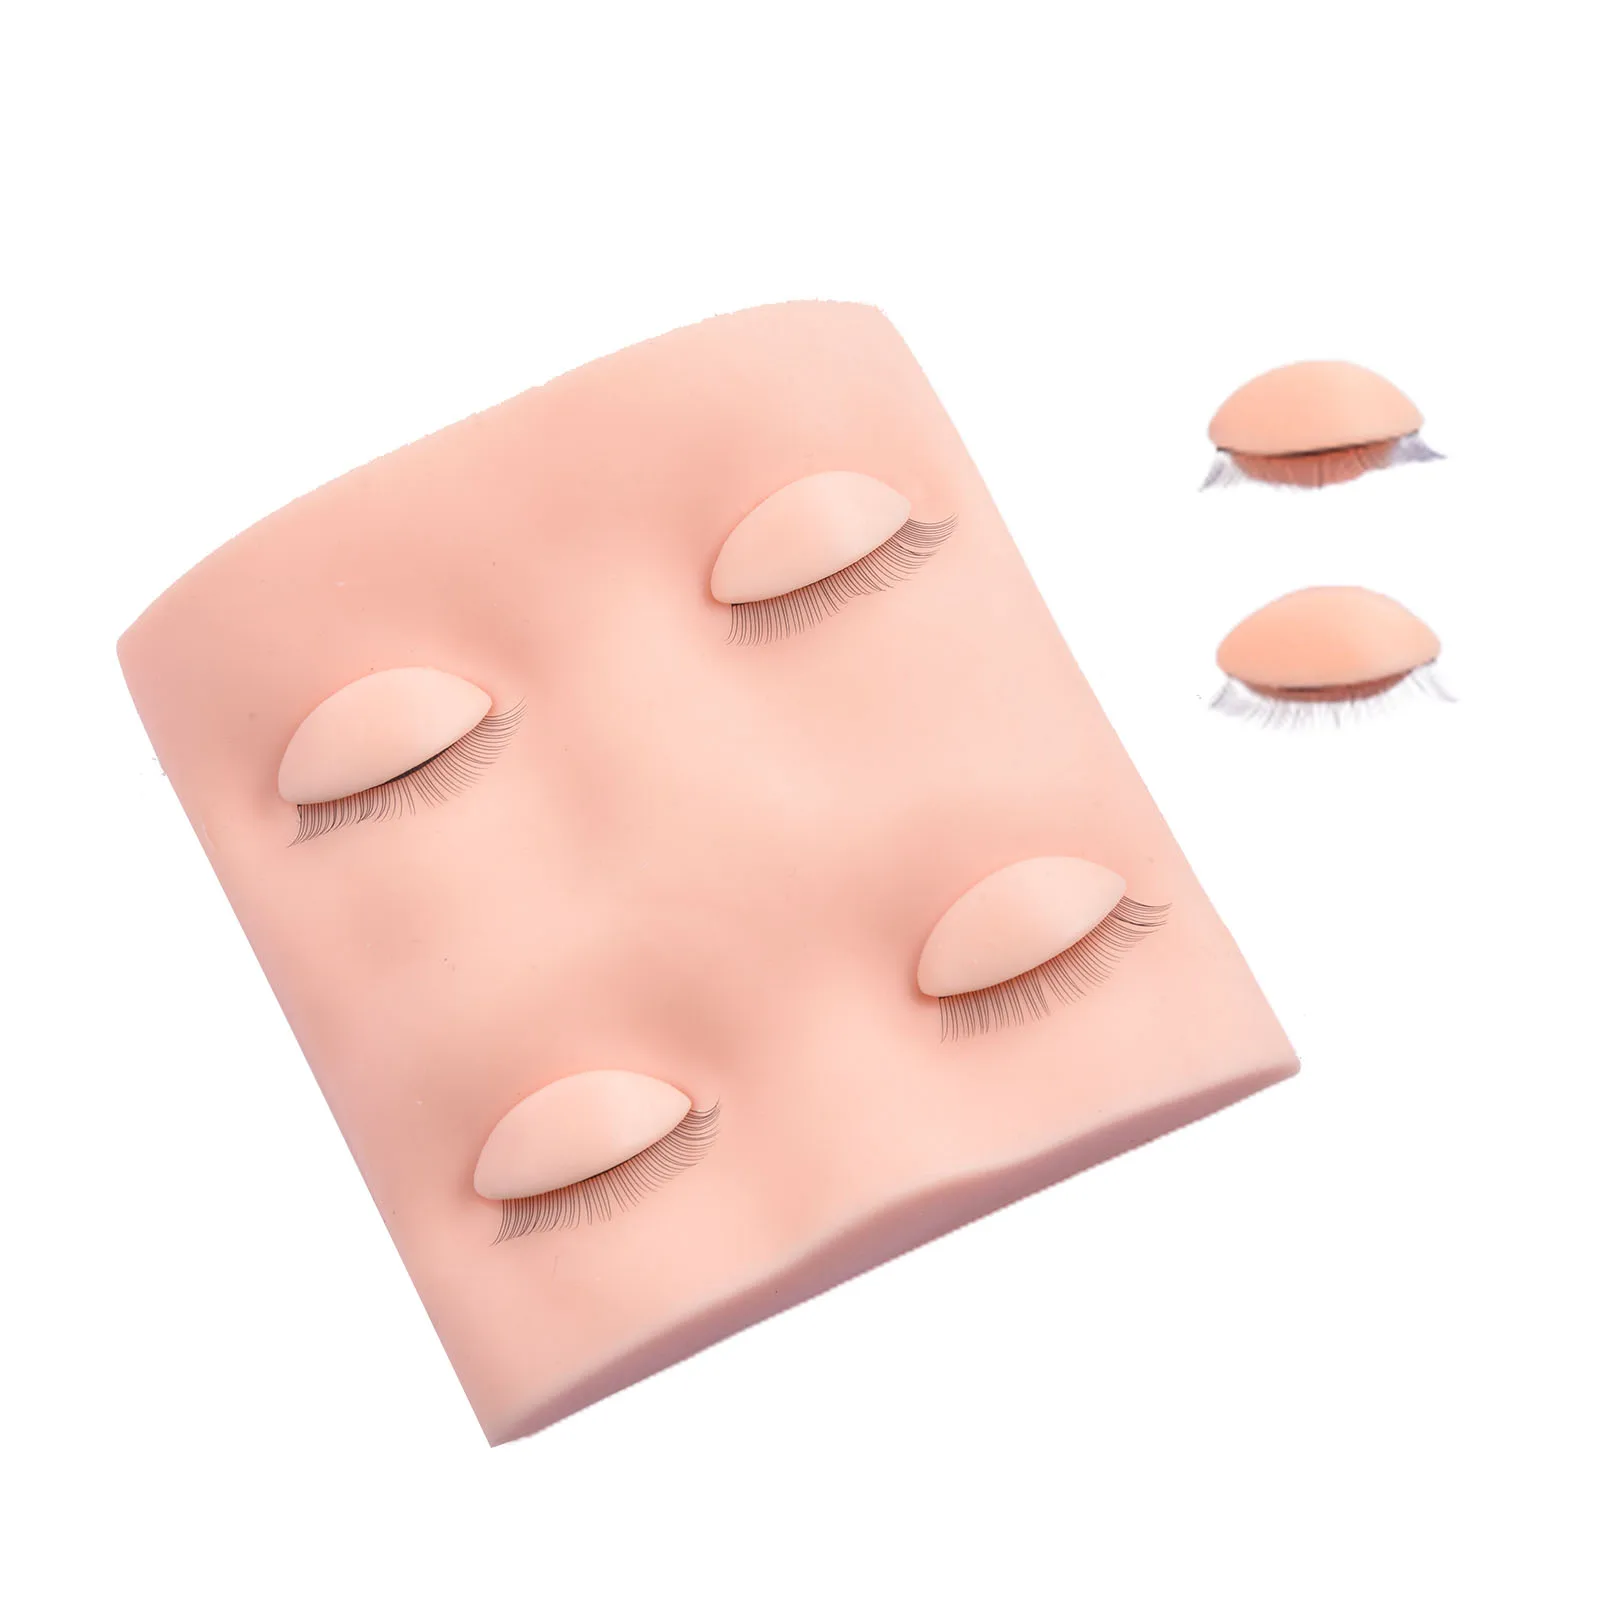 

Eyelash Mannequin Head Silicone Training Mannequin Head With 3 Pairs Replaceable Eyelids Head Mold For Makeup Practice And Lash